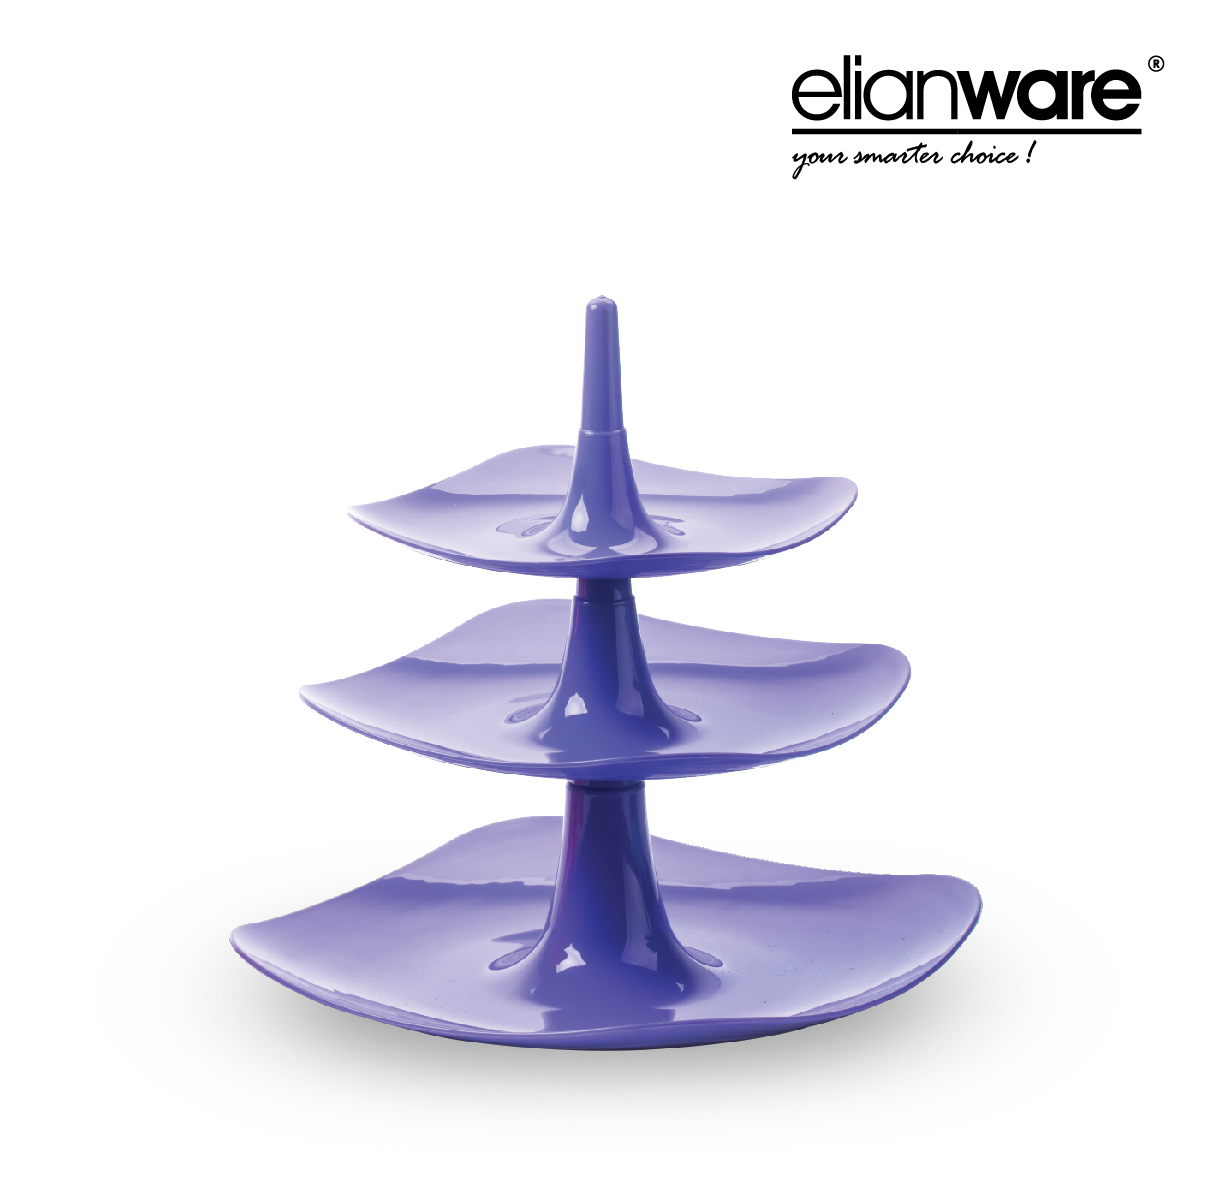 ELIANWARE Cup Cake Stand, Muffin Cake Stand, Square Shape, 3 Tier / 3 Tingkat